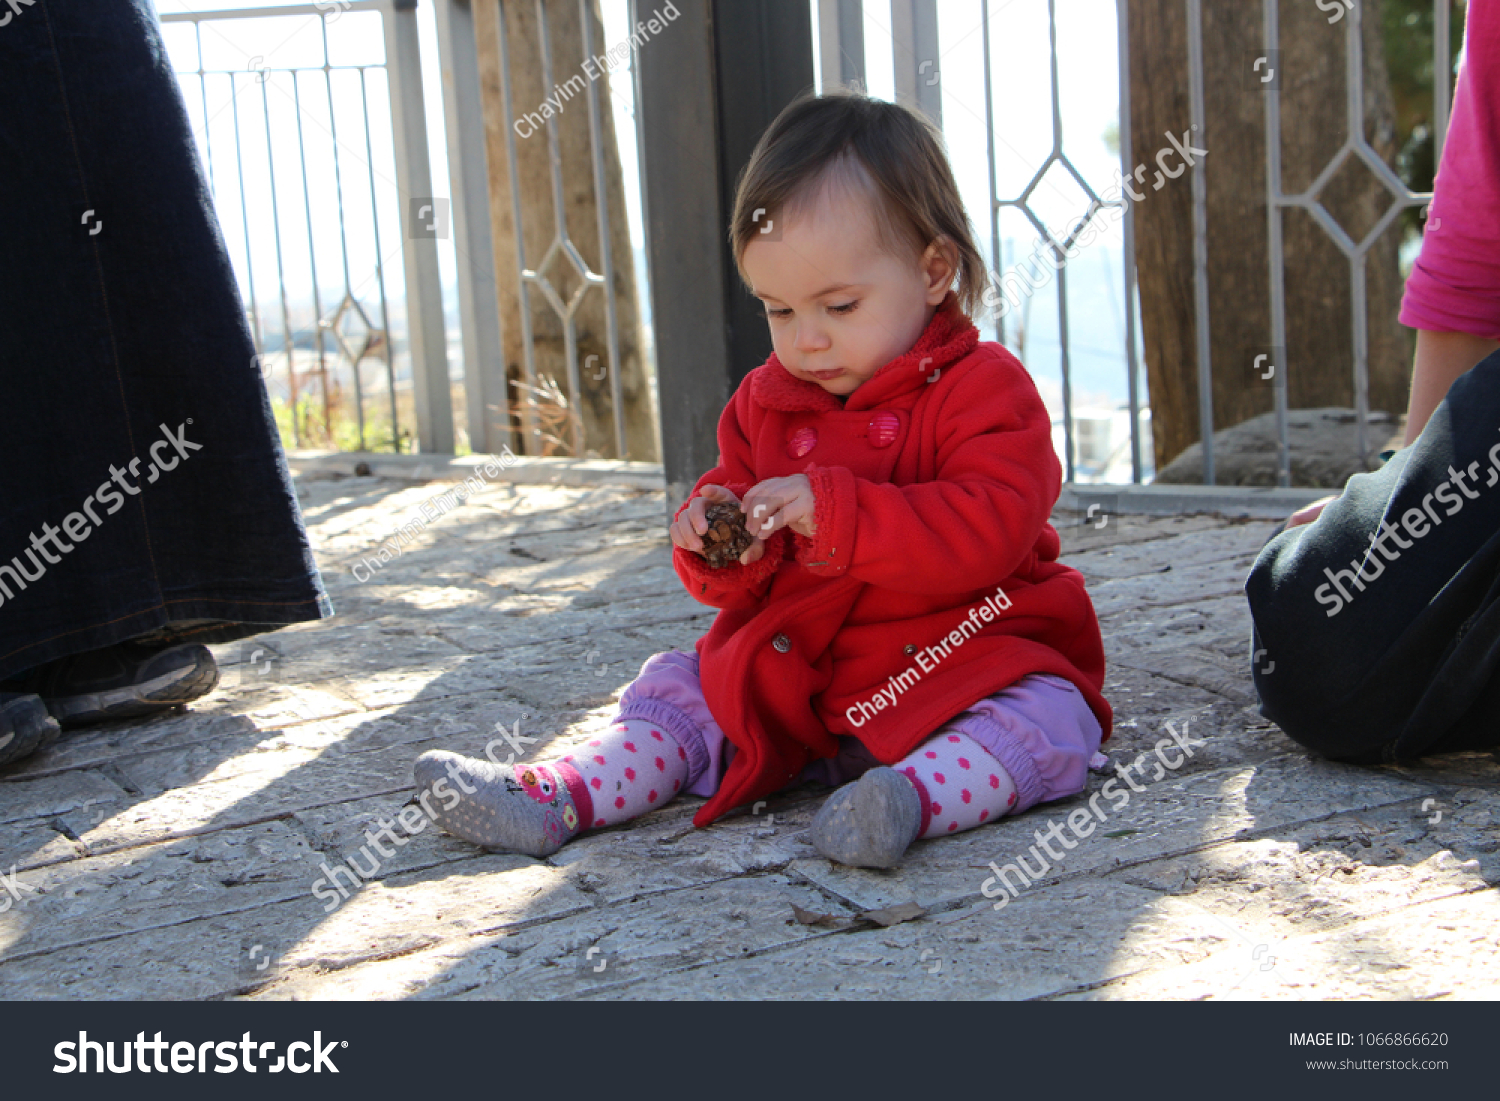 Baby girl in red coat sitting on the sidewalk, playing with a pinecone
 #1066866620